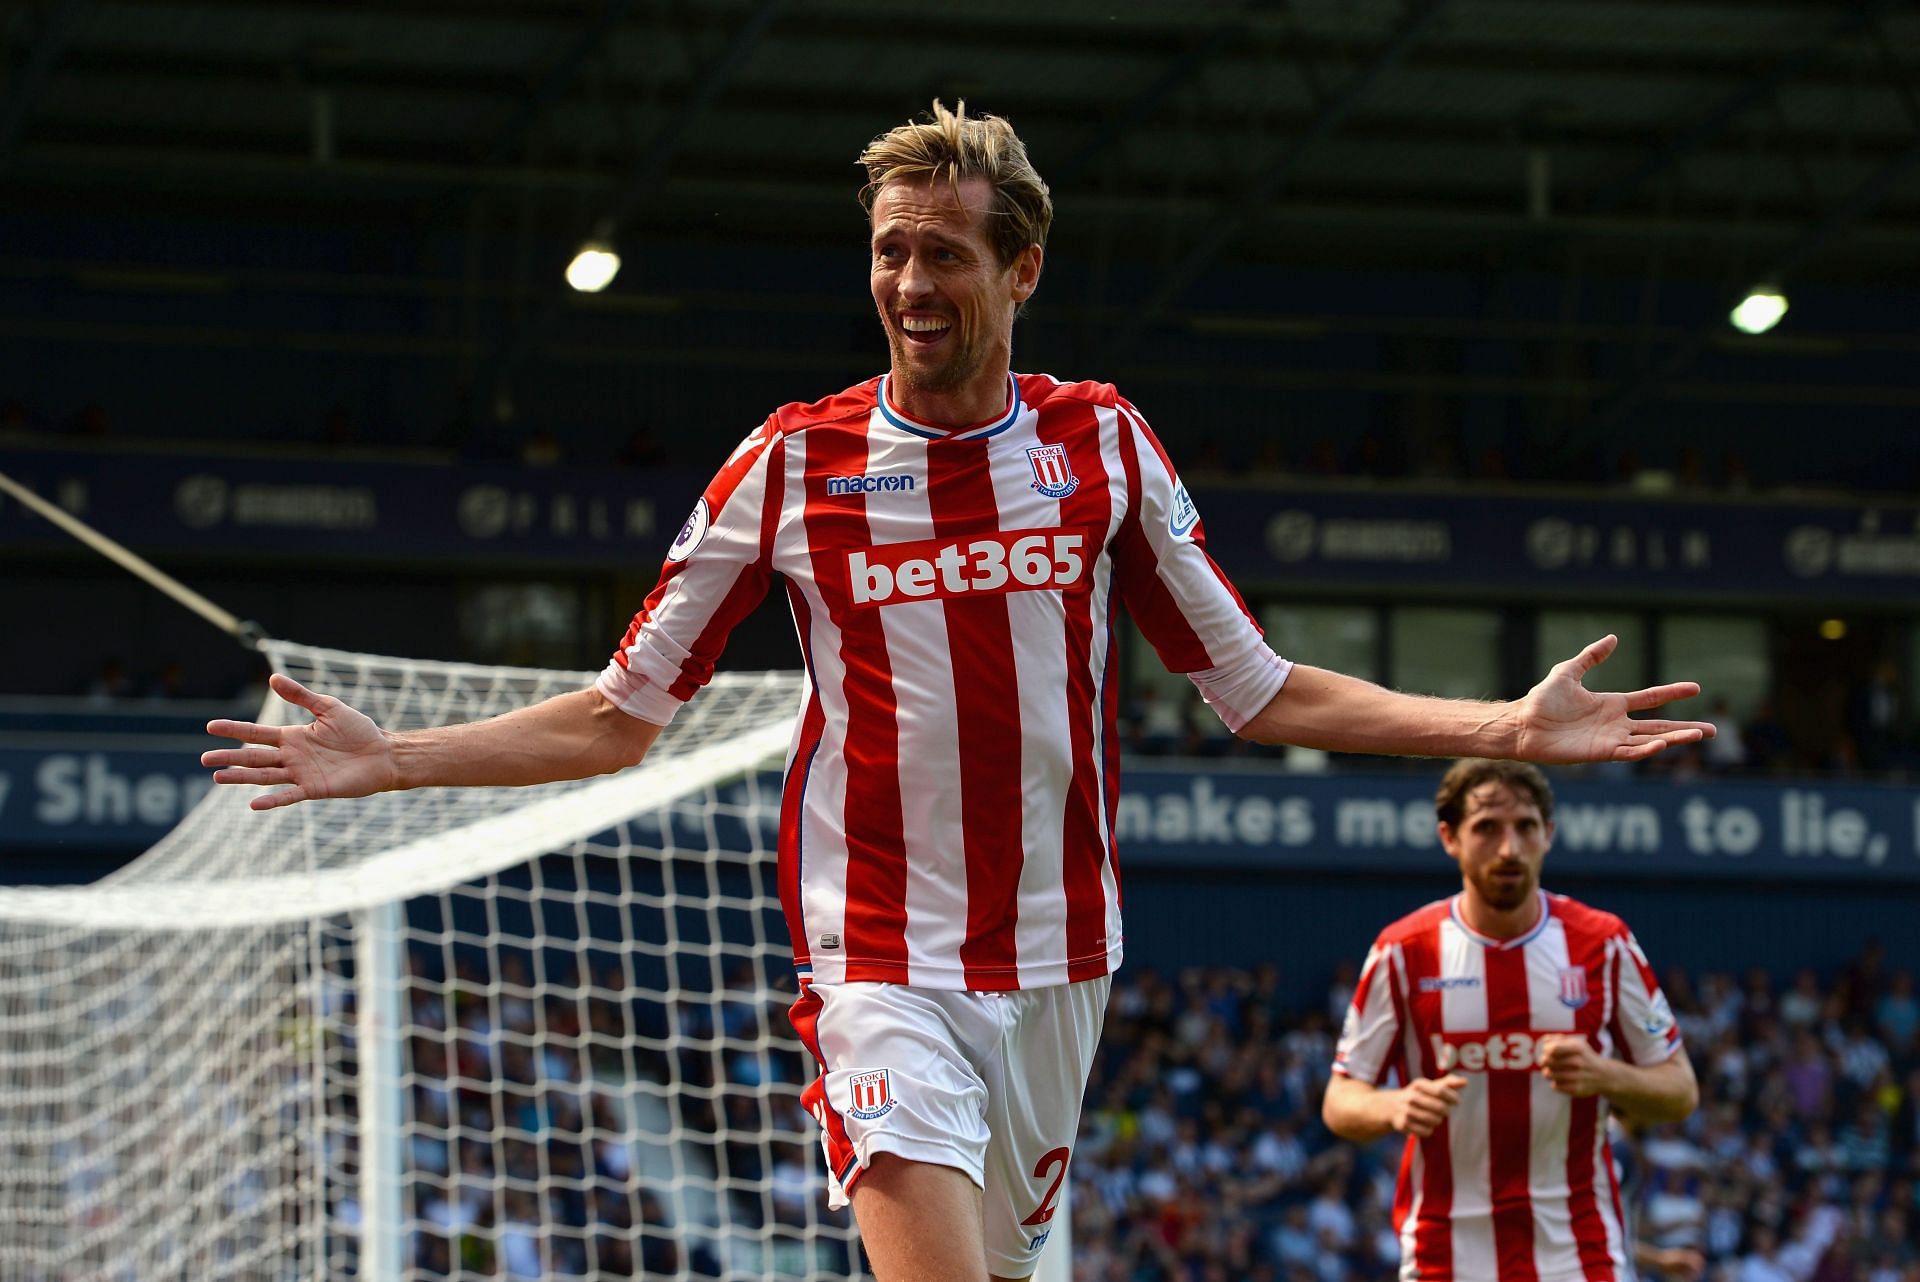 England striker Peter Crouch in action for Stoke City.